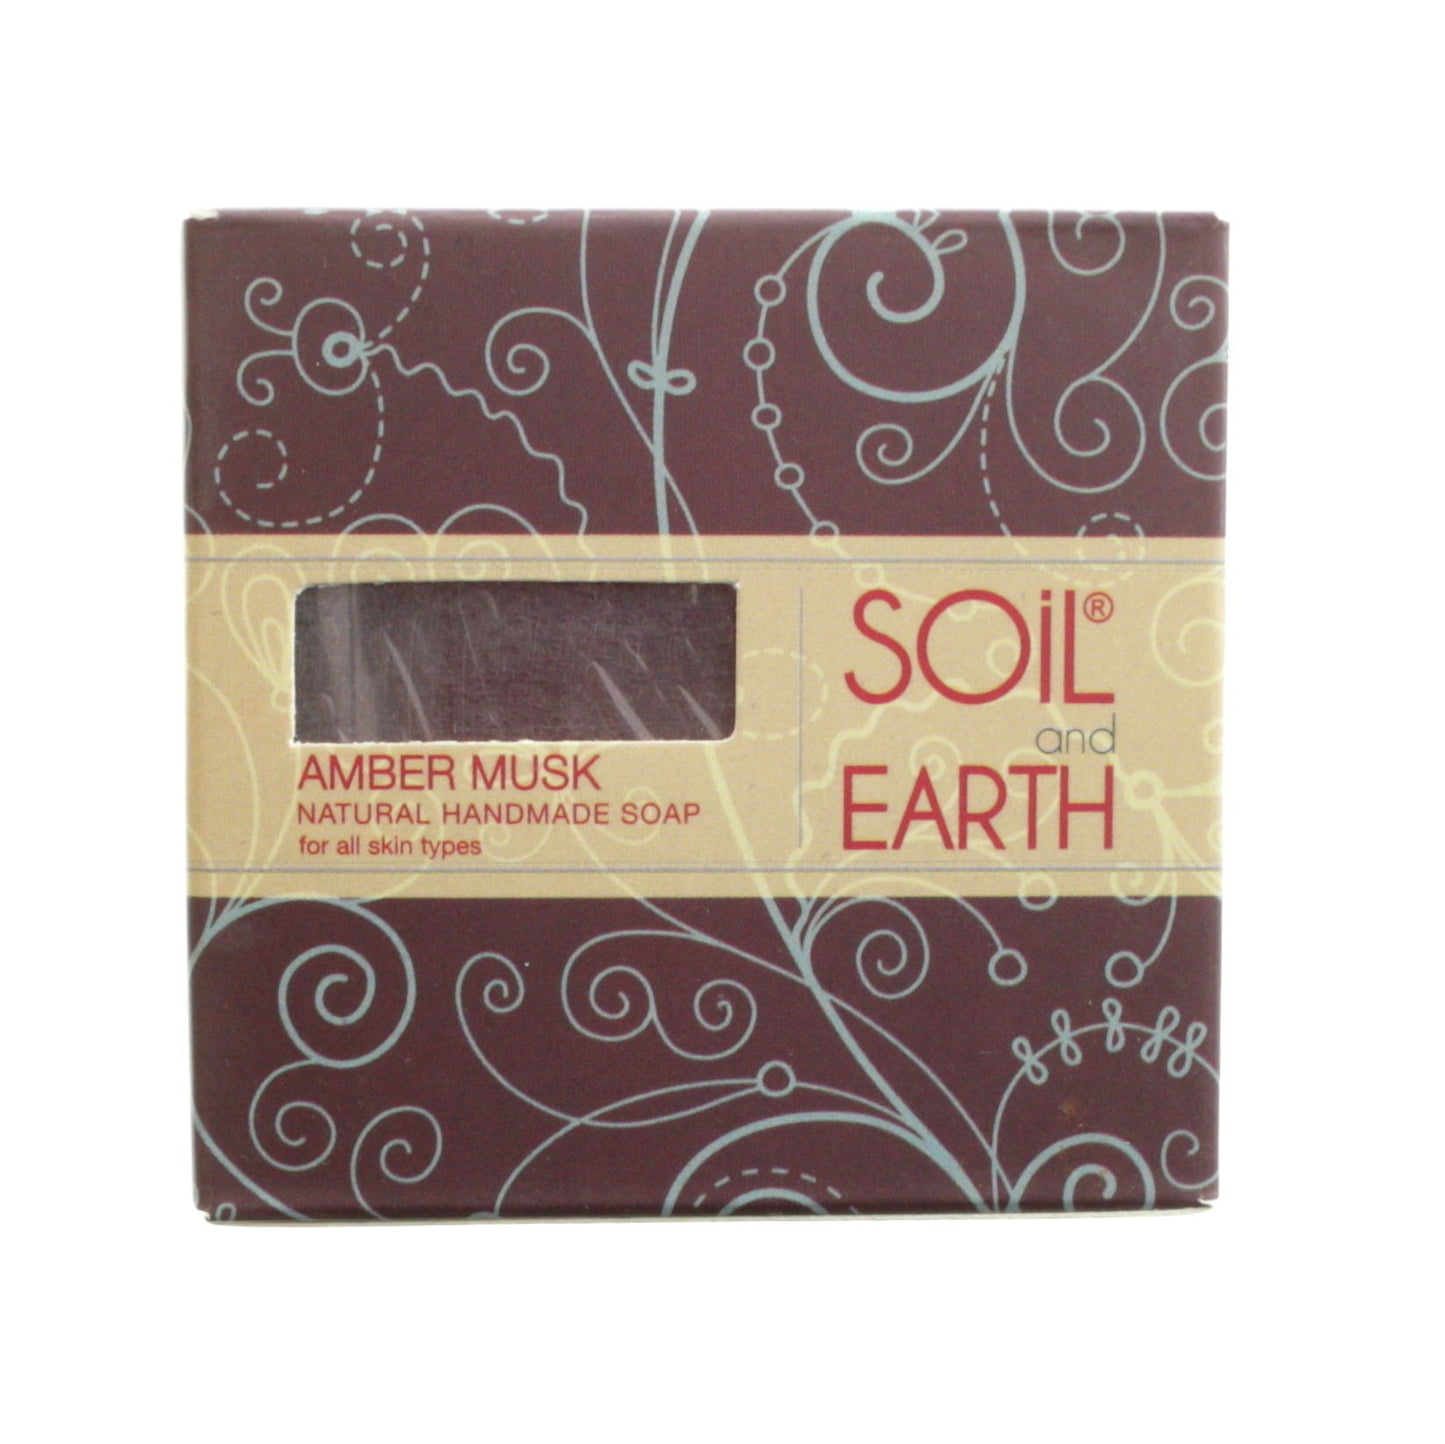 SOIL AND EARTH NATURAL HANDMADE SOAP- AMBER MUSK (Pack of 4)